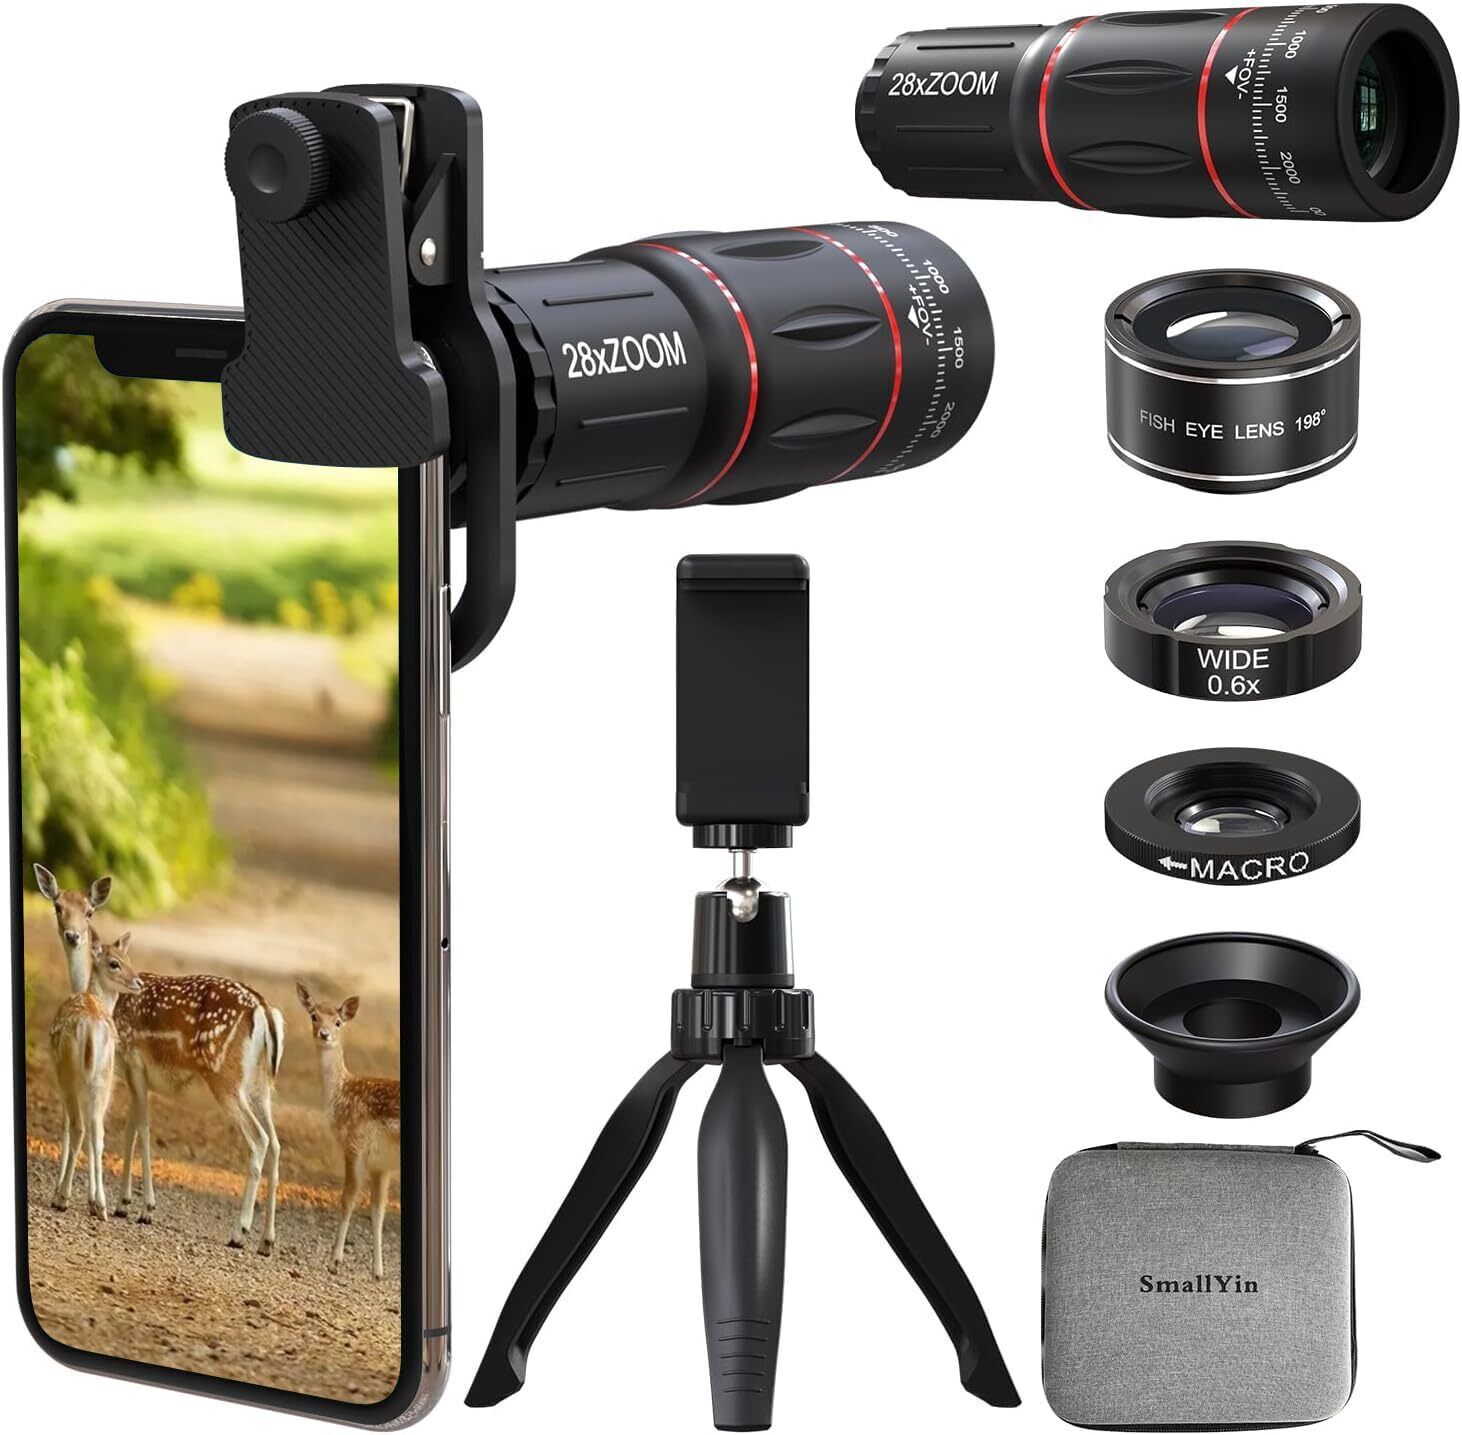 Smallyin 4 In1 Smartphone Camera Lens With 28X Telephoto Triple Lens Kit W28-41